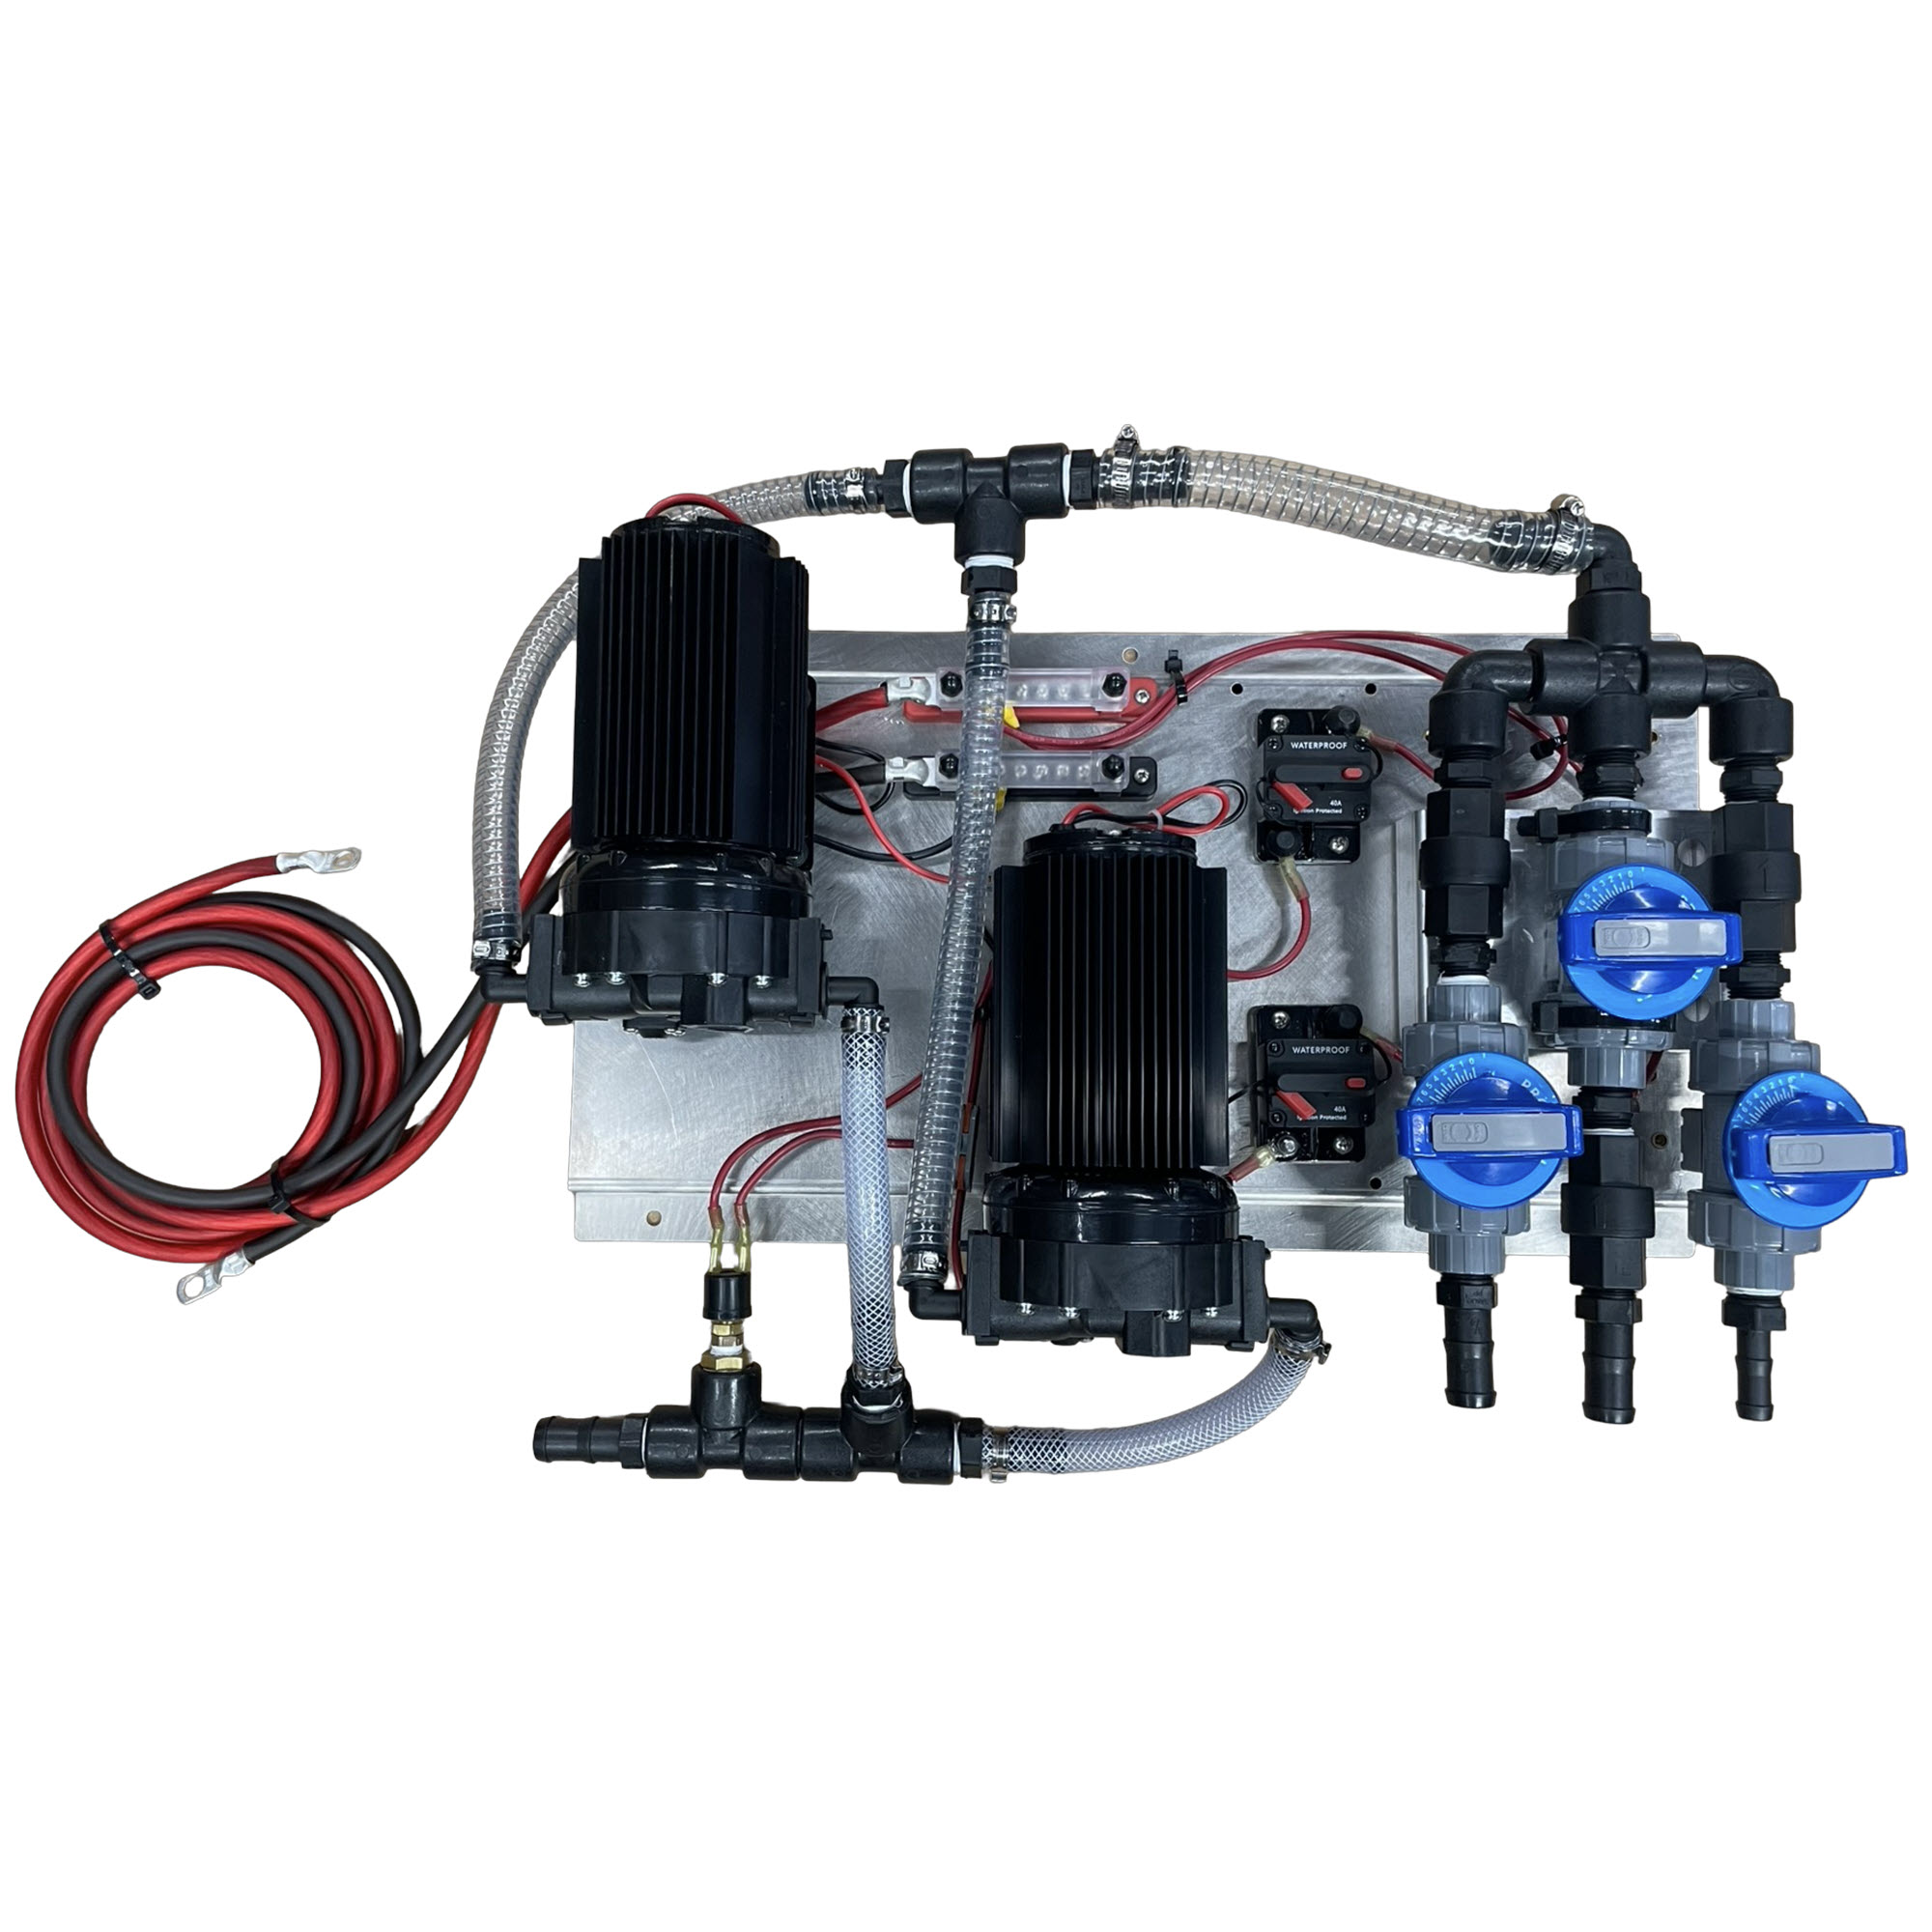 Does this kit comes with the two pumps?